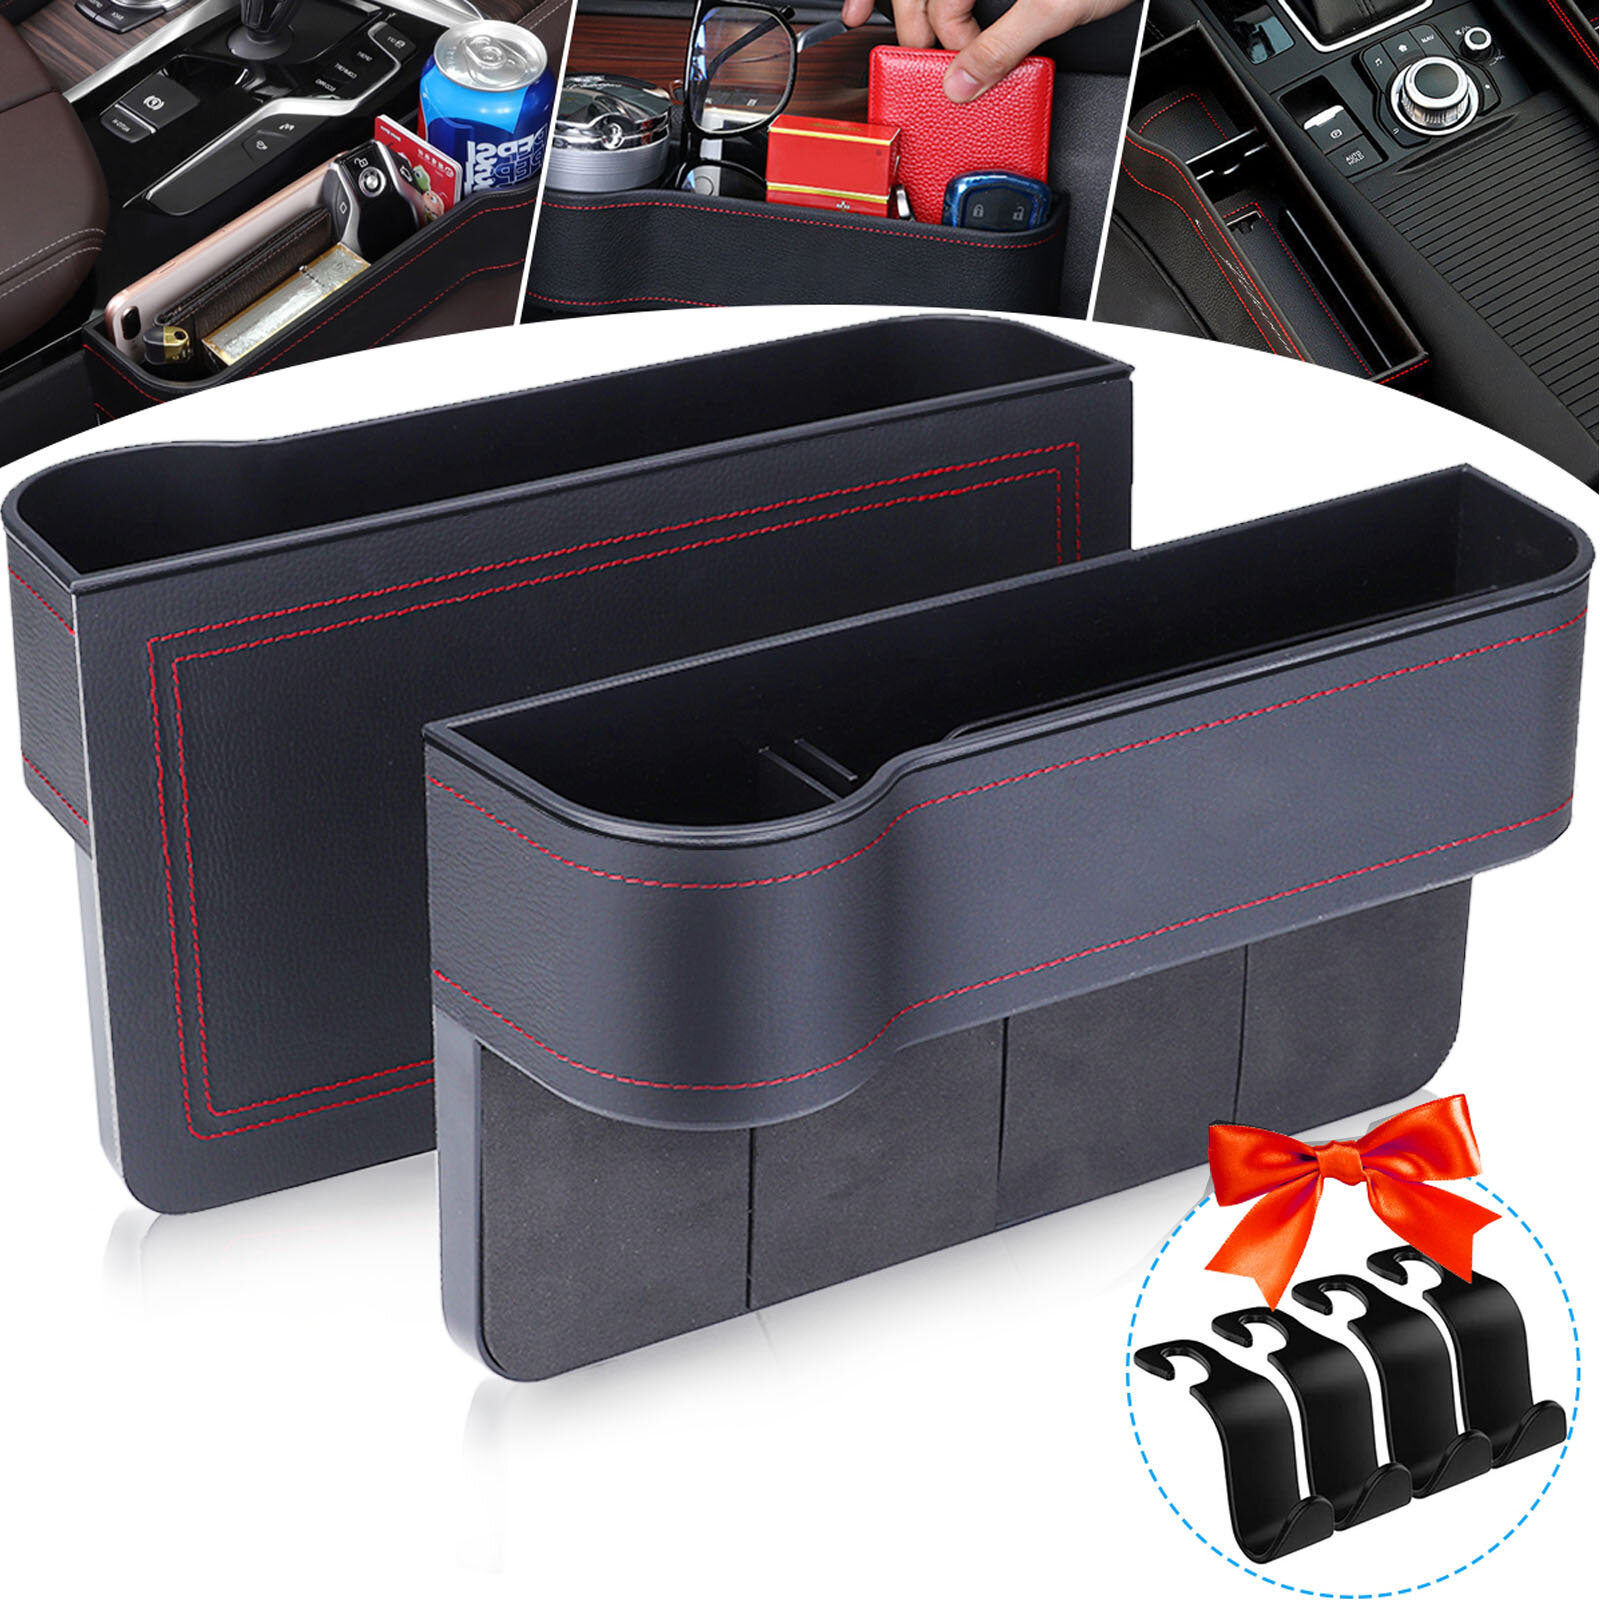 

1 Pair of Car Organizer Auto Seat Crevice Gaps Storage Box Cup Mobile Phone Holder for Pockets Stowing Tidying Organizer